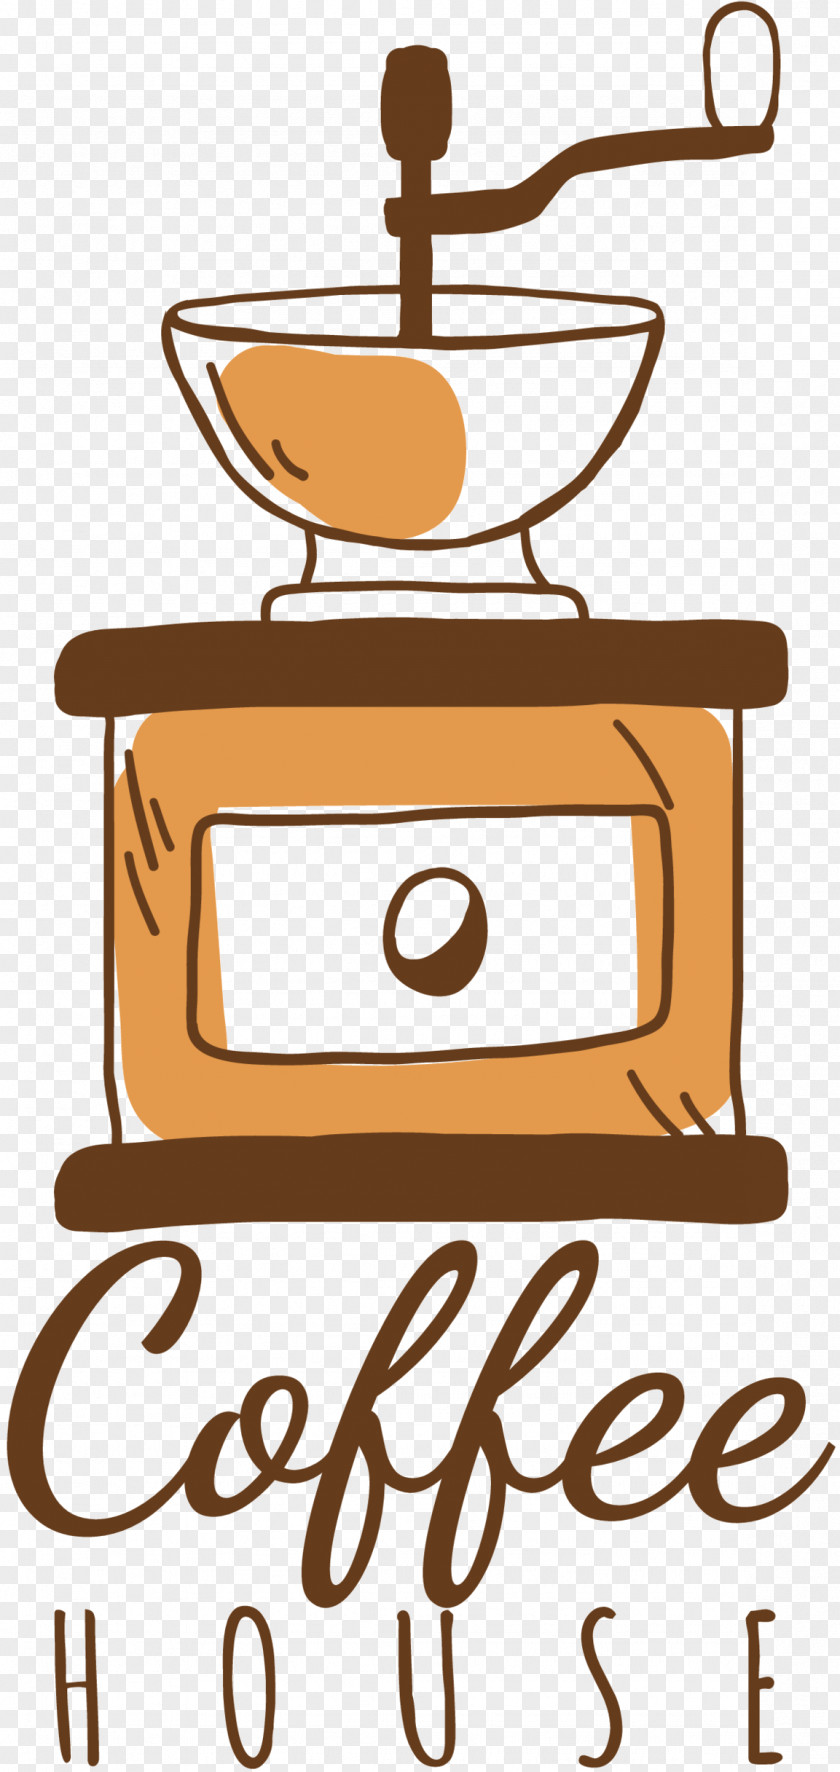 Instant Coffee Cafe Vector Graphics Espresso PNG